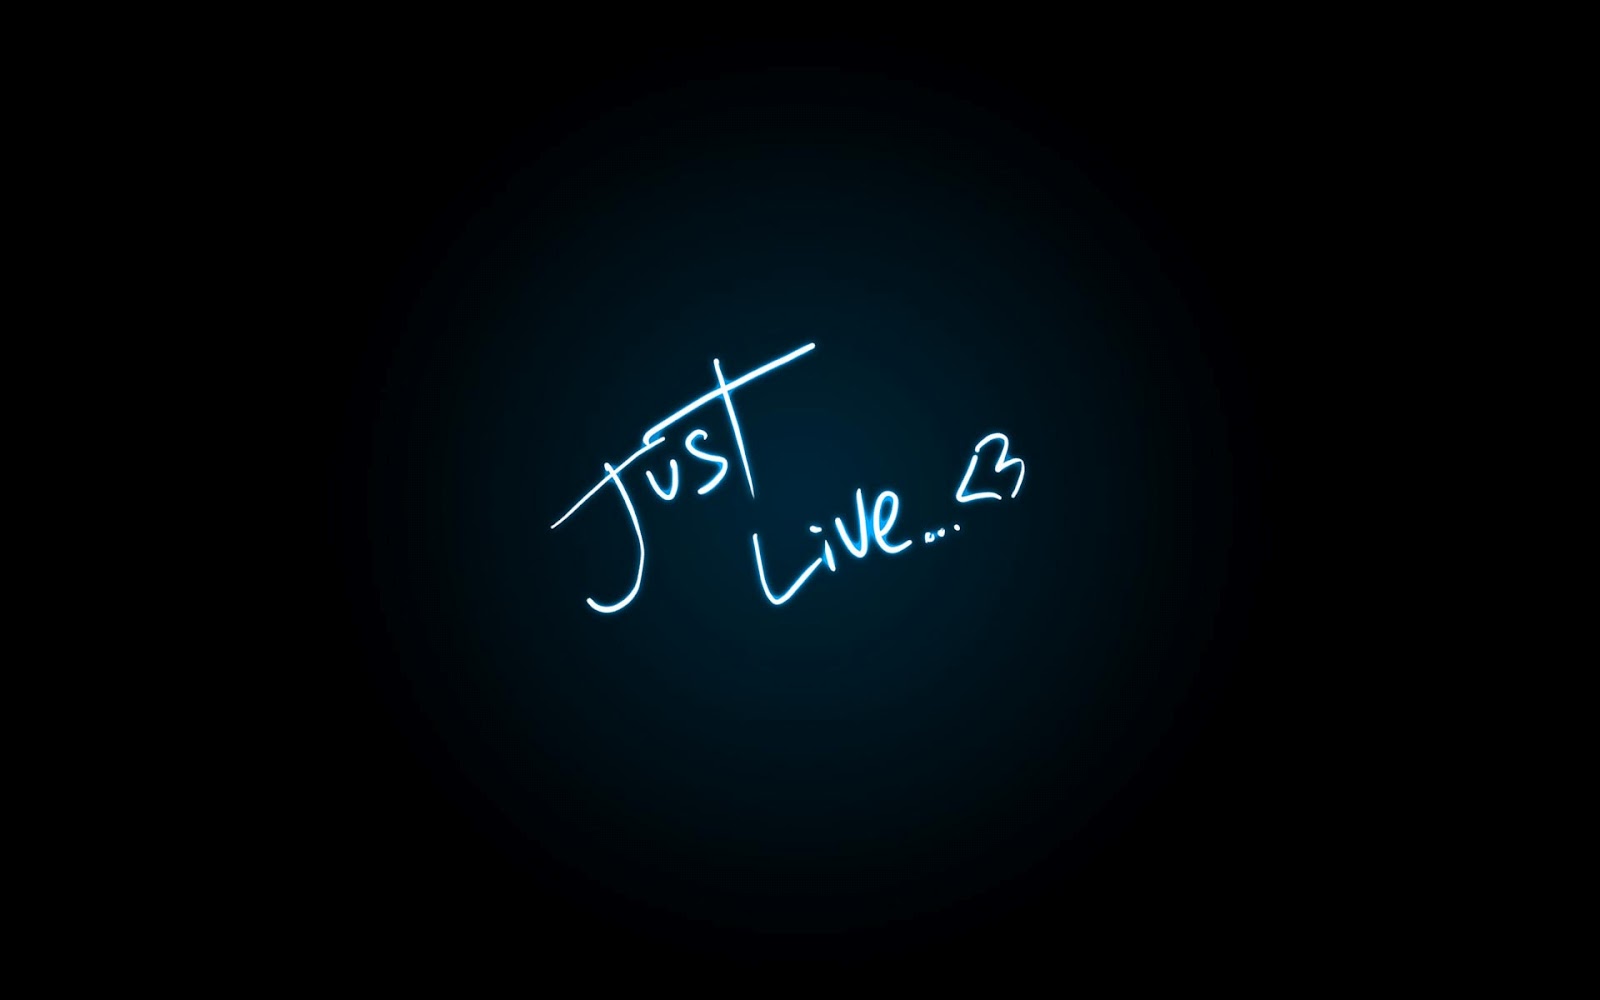 Iphone 6 6s Plus Resolutions - Just Live , HD Wallpaper & Backgrounds